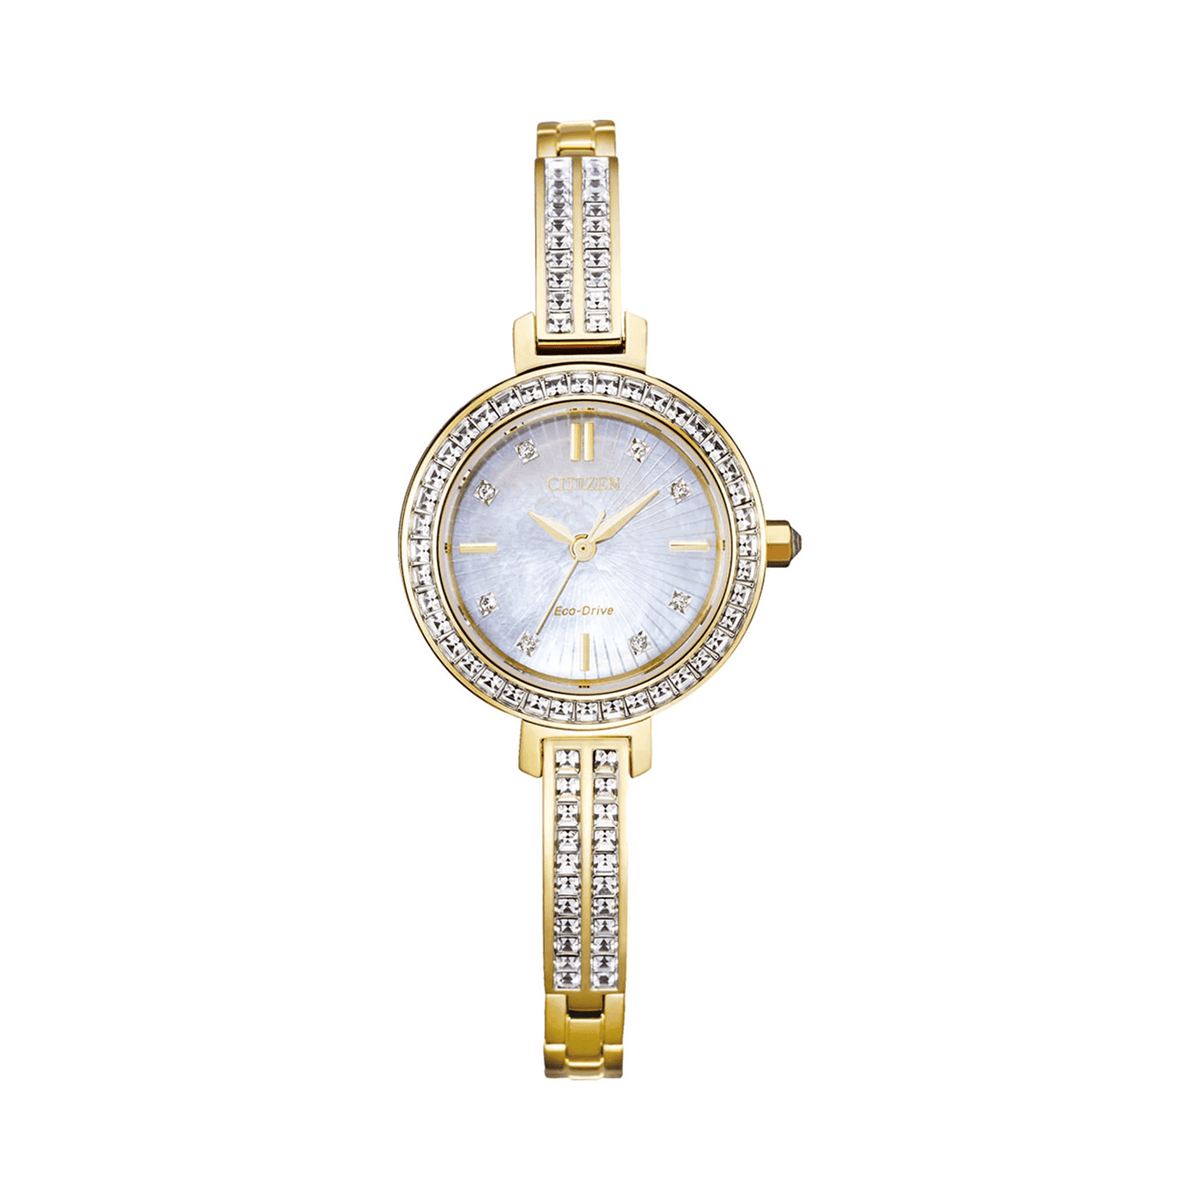 Citizen Eco-Drive Women's 25mm Gold PVD Eco Drive Watch EM0862-56D - Wallace Bishop